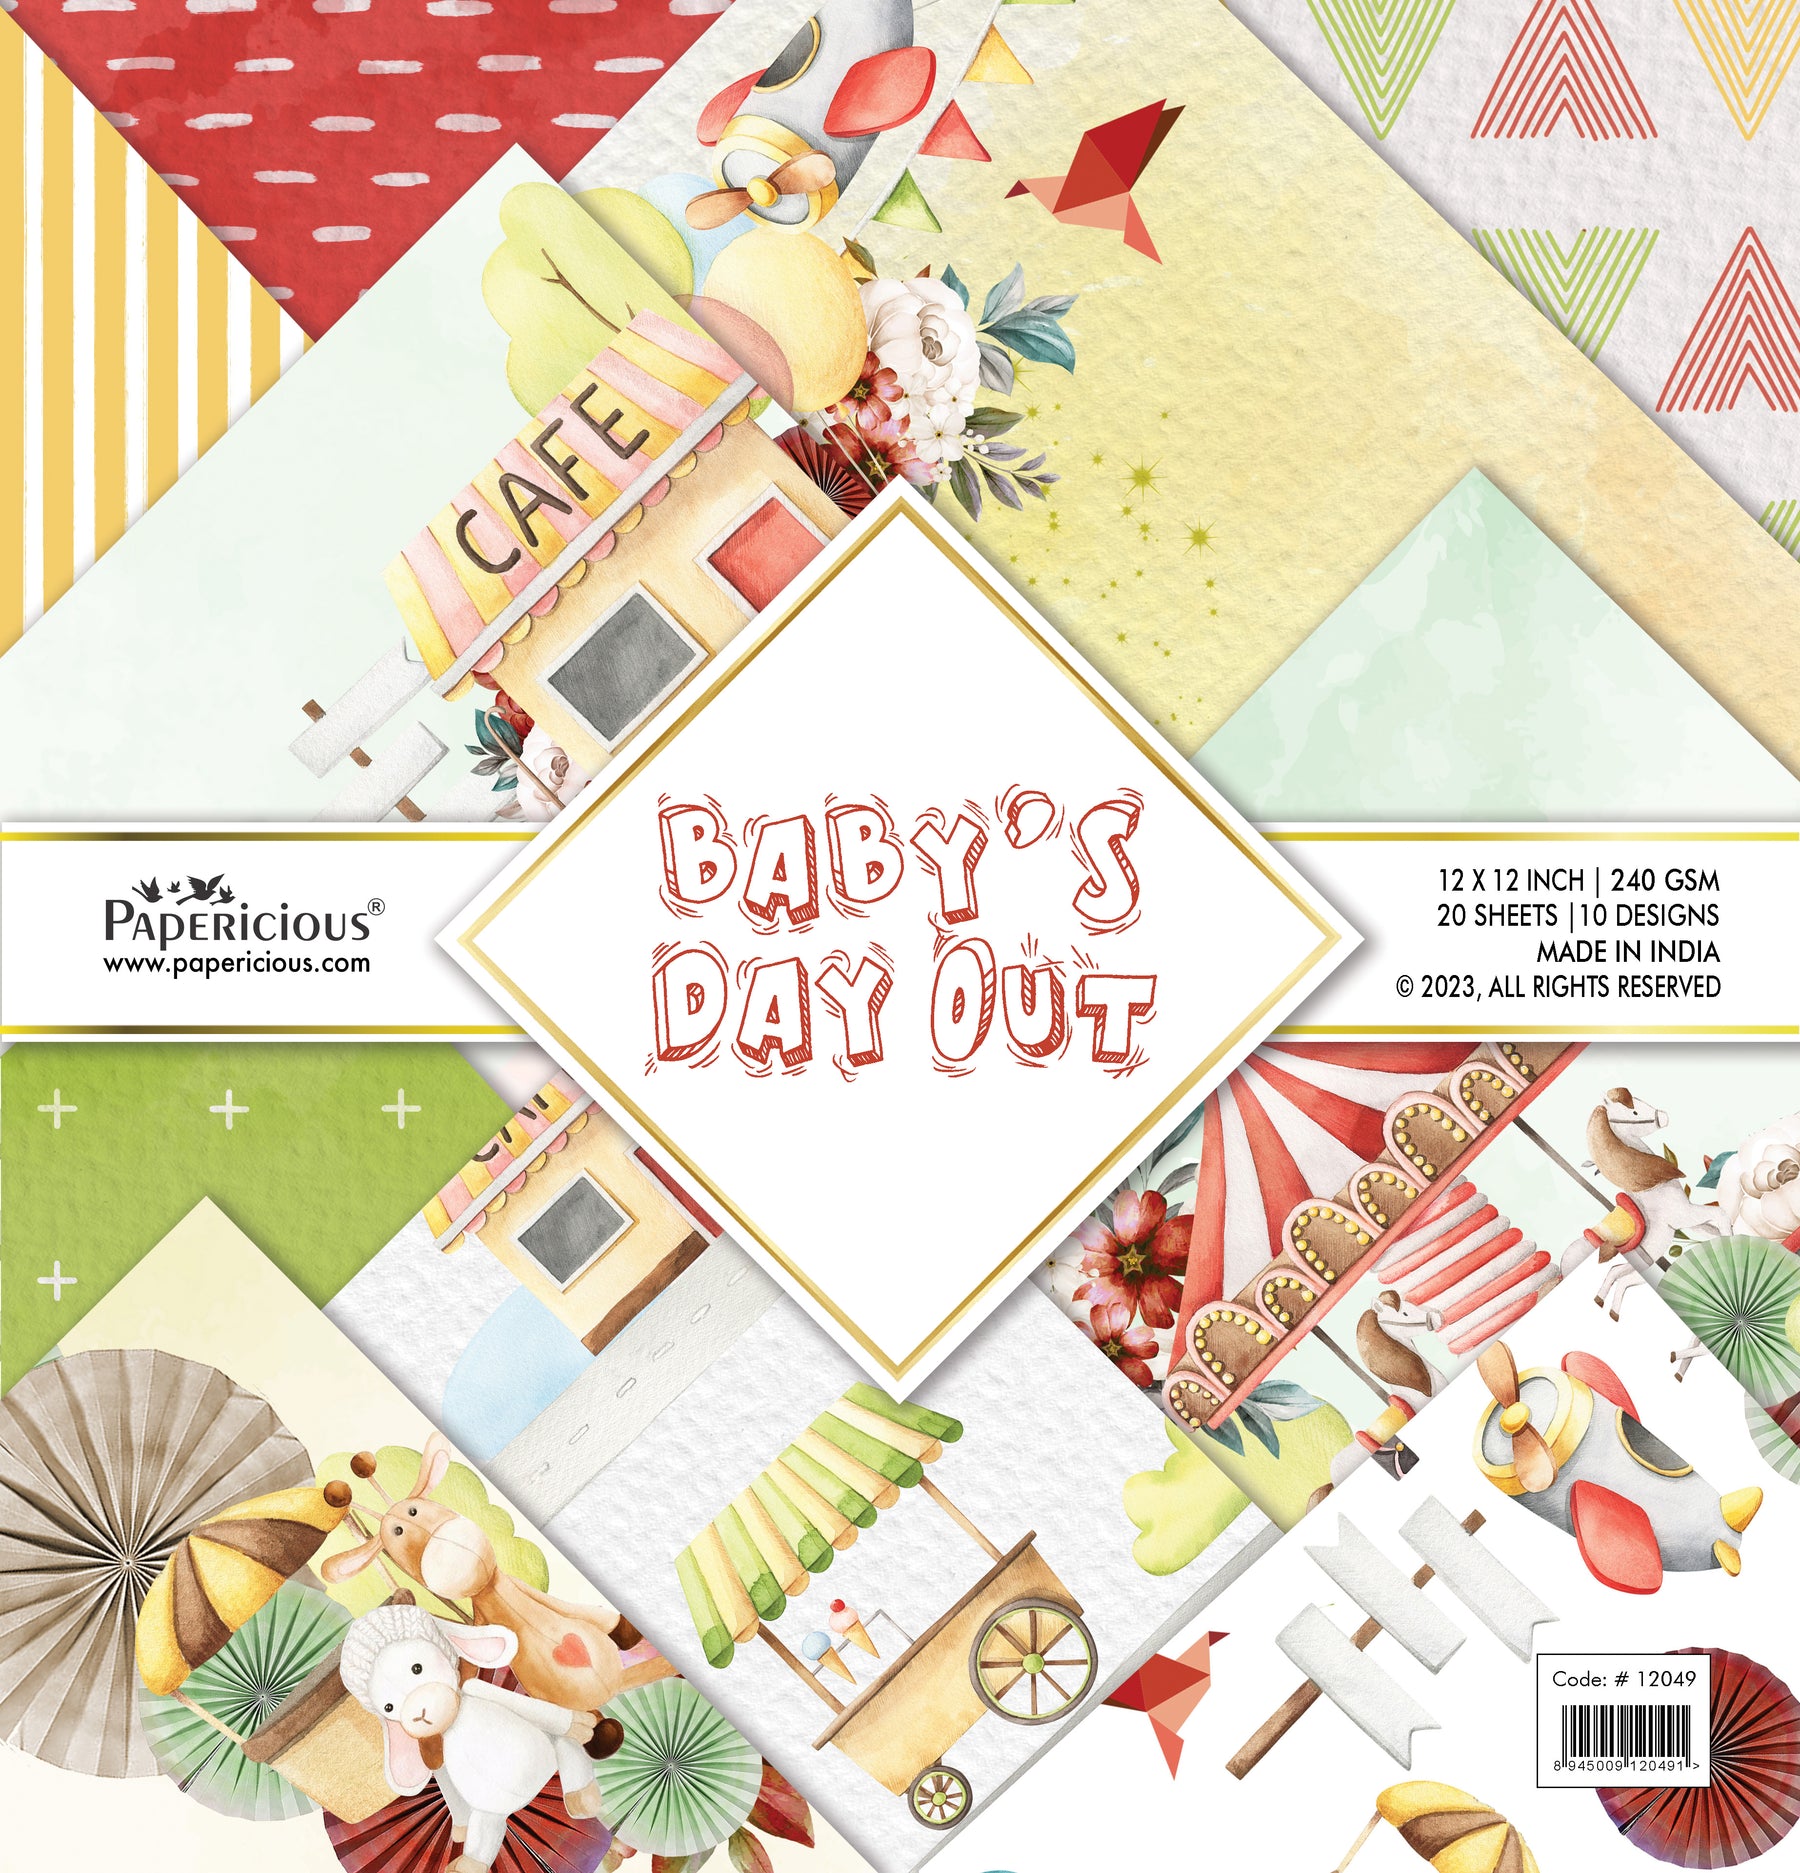 PAPERICIOUS - Baby's Day Out -  Designer Pattern Printed Scrapbook Papers 12x12 inch  / 20 sheets